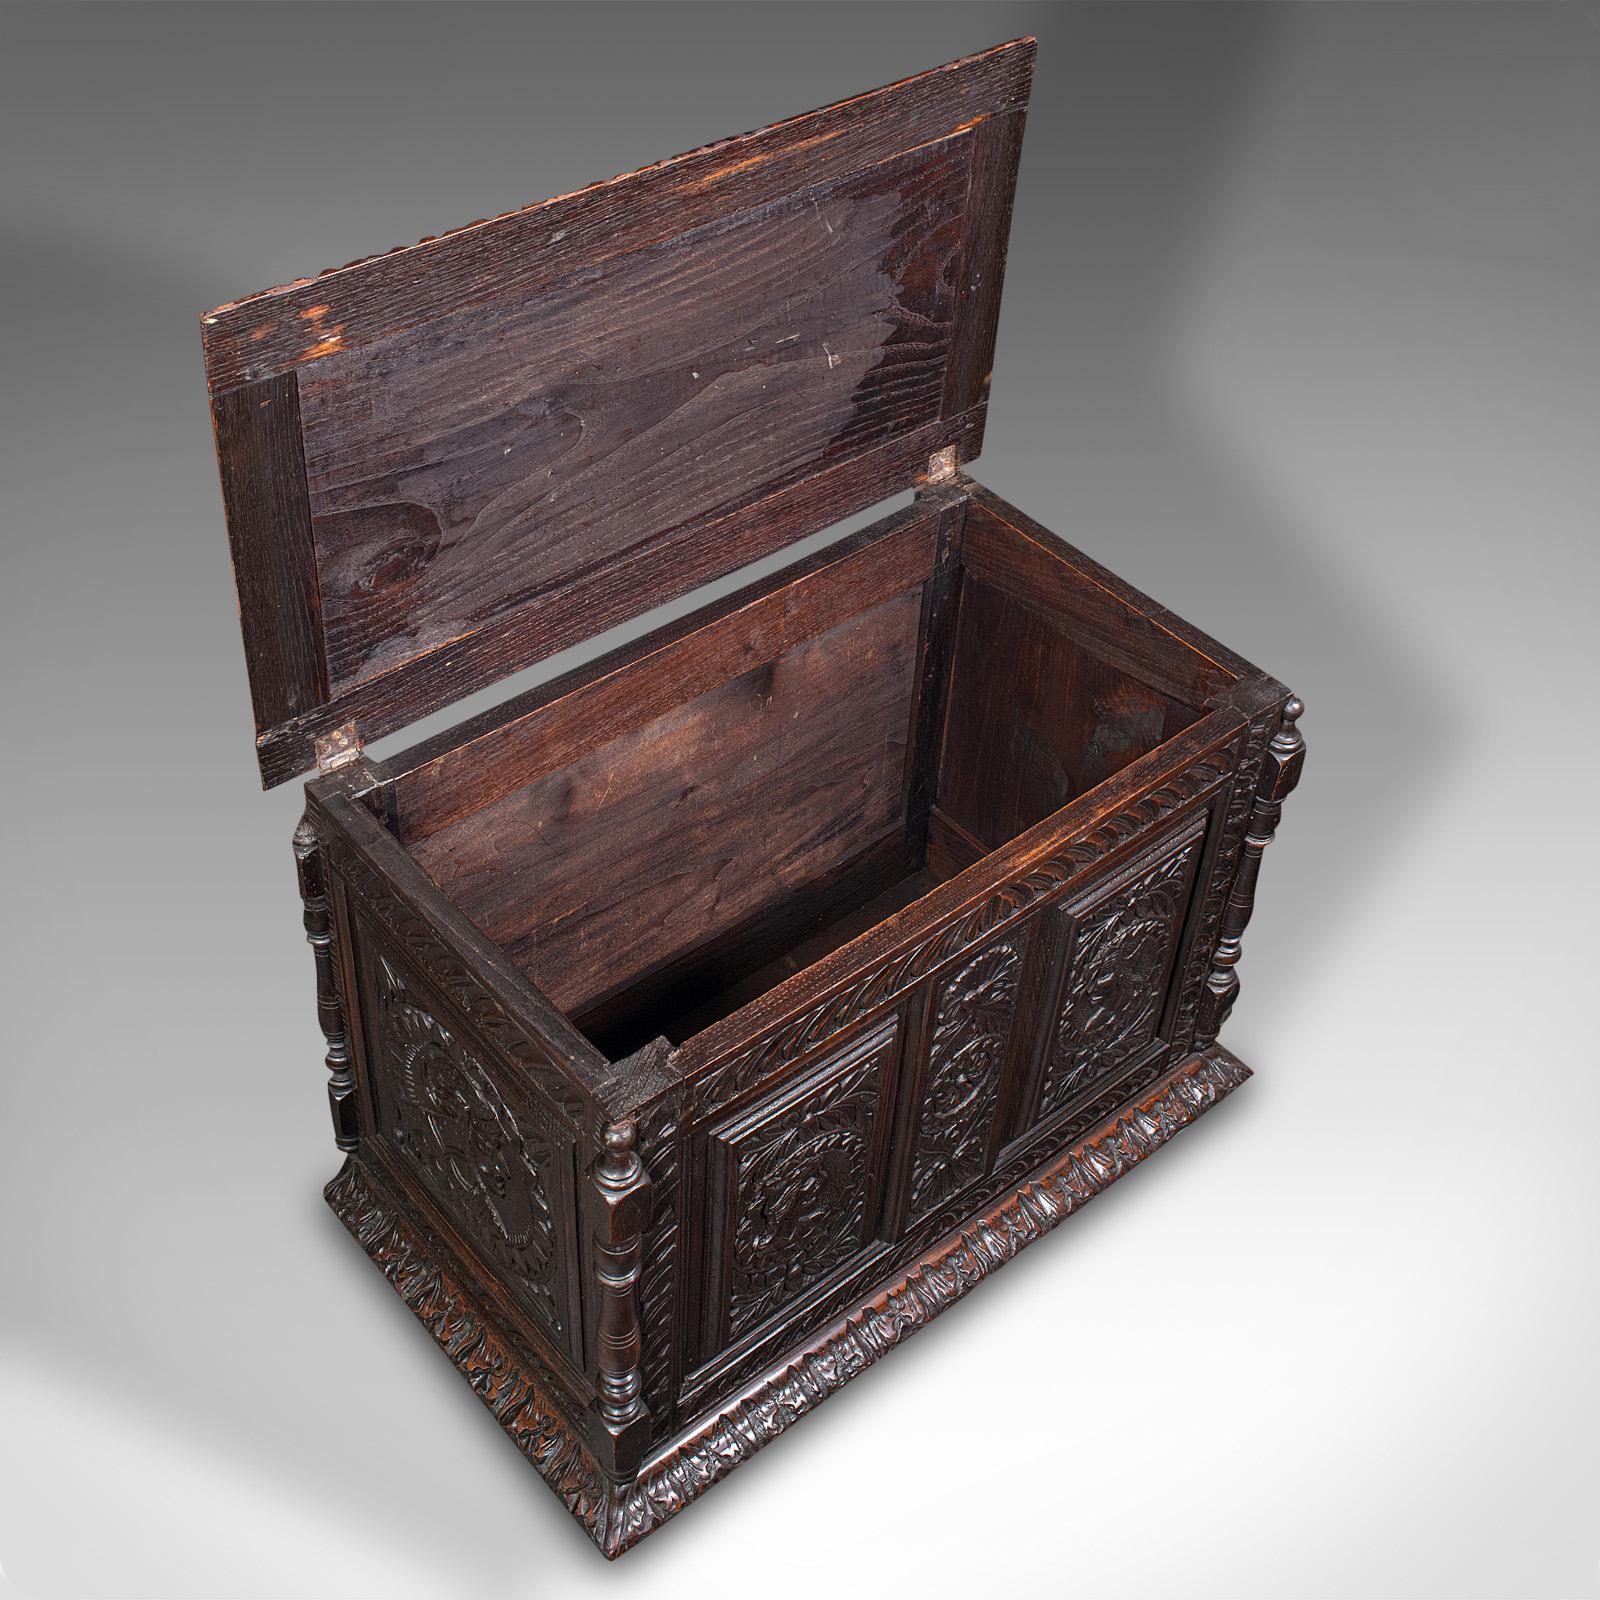 Late 19th Century Small Antique Carved Coffer, English Oak, Gothic Revival, Blanket Box, Victorian